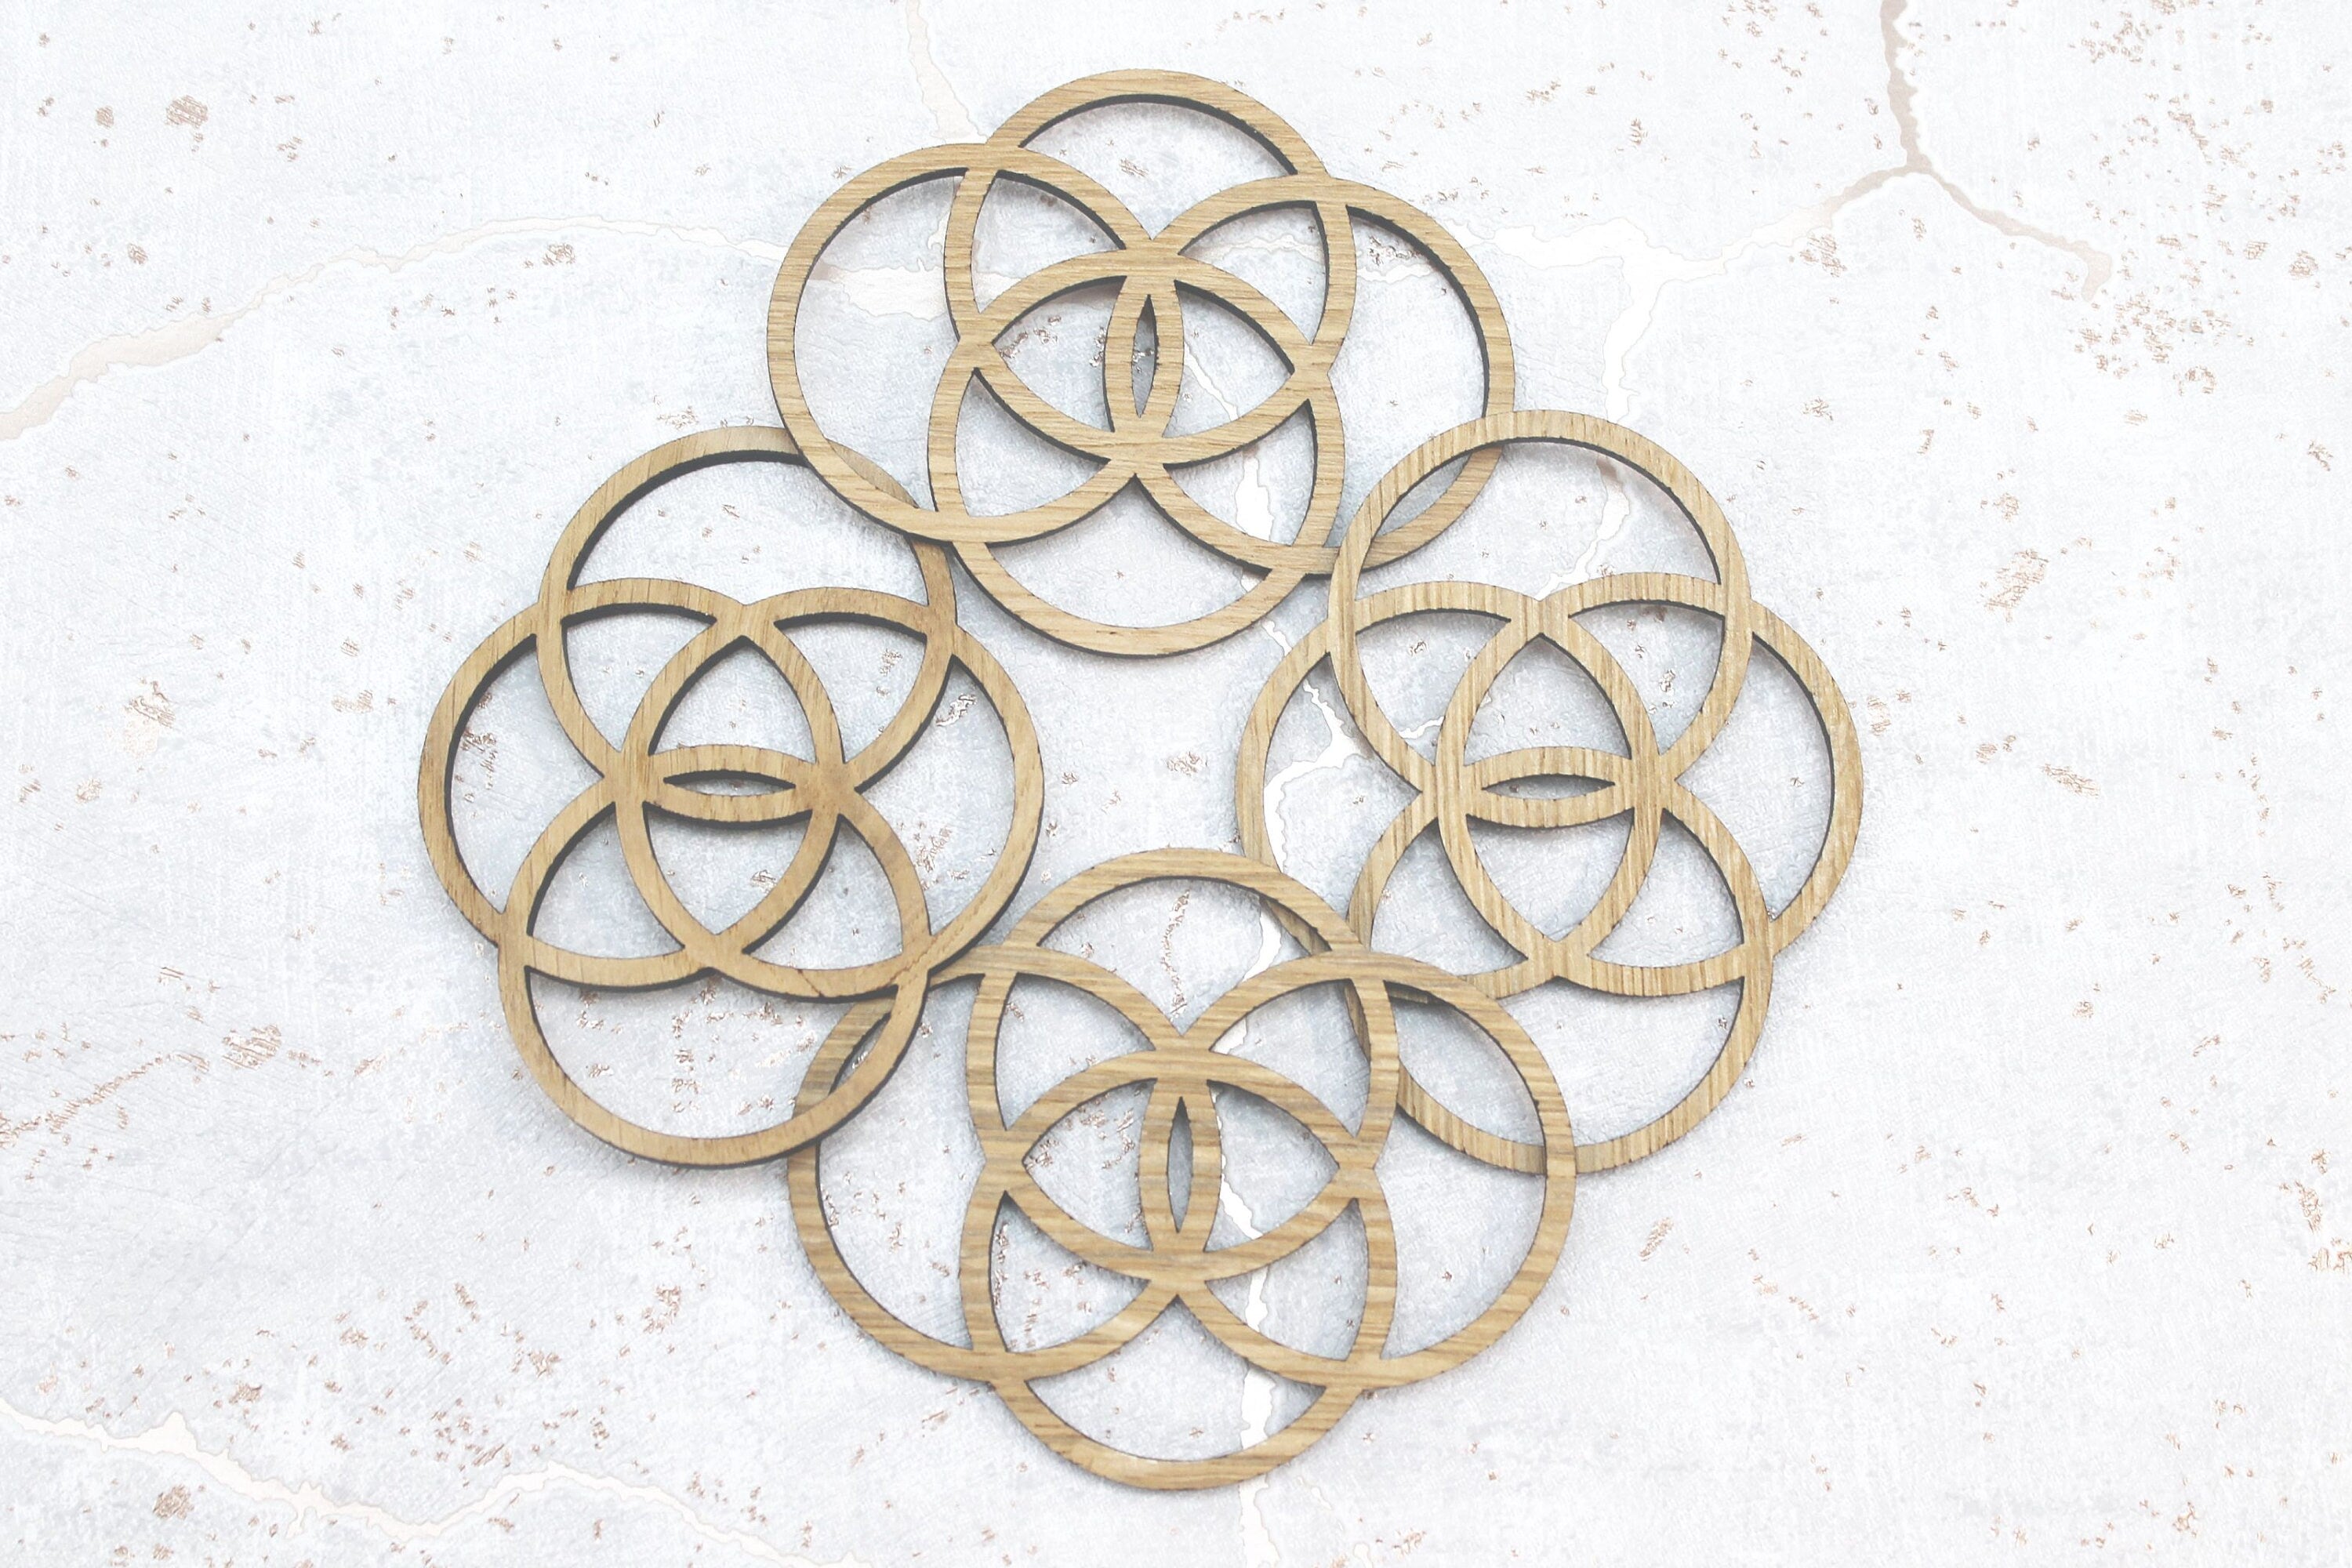 Five Elements of Life; Earth, Water, Fire, Air, and Spirit - Sacred Geometry - Laser Cut Coasters Set of 4